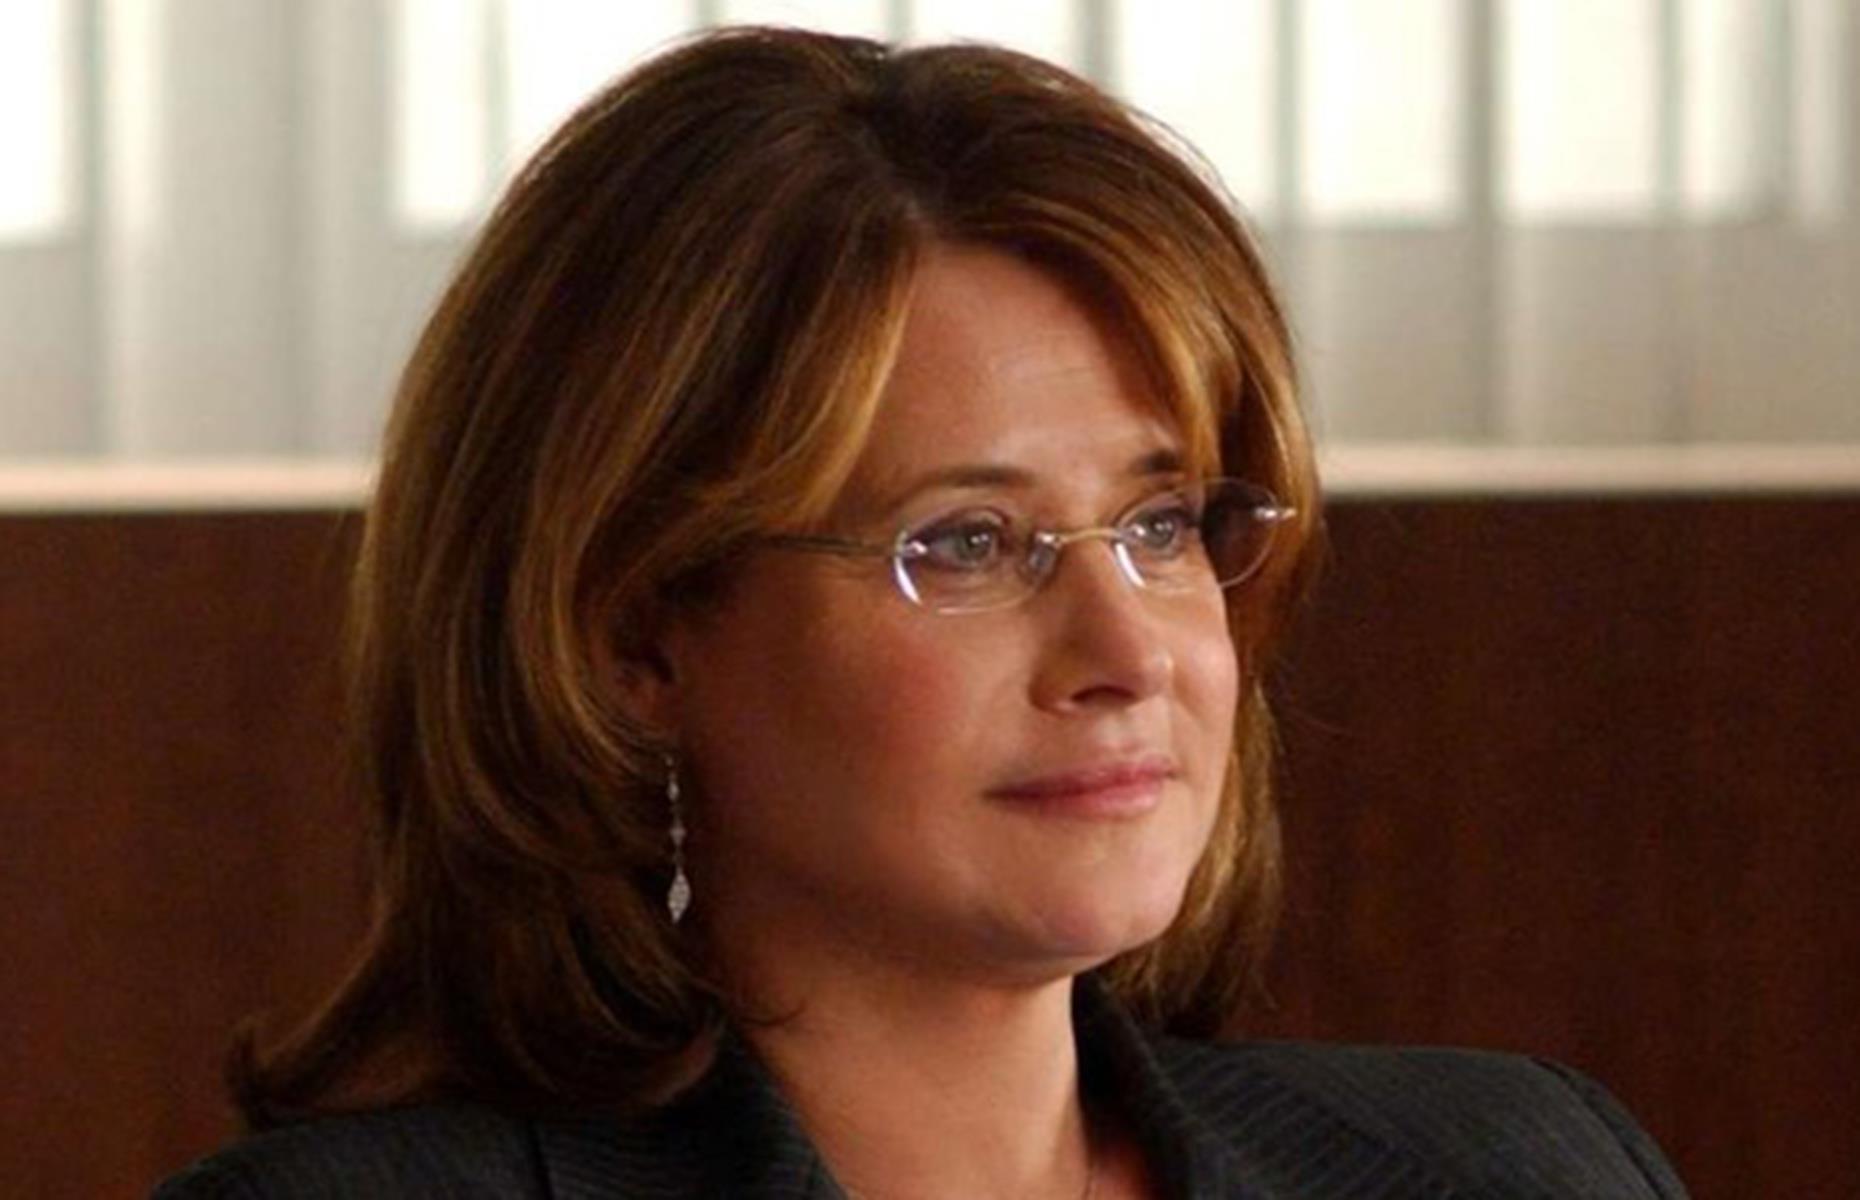 <p>Lorraine Bracco played Jennifer Melfi, Tony Soprano’s psychiatrist. She appeared in all six seasons of the show.</p>  <p>Bracco started out acting in Italian movies and made her screen debut in 1979's <em>Duos Sur Canap</em>é<em>. </em></p>  <p>Her other notable gigs before<em> The Sopranos</em> include the crime classic <em>GoodFellas </em>and 1995's <em>The Basketball Diaries</em>, which also starred Leonardo DiCaprio in one of his first major roles.</p>